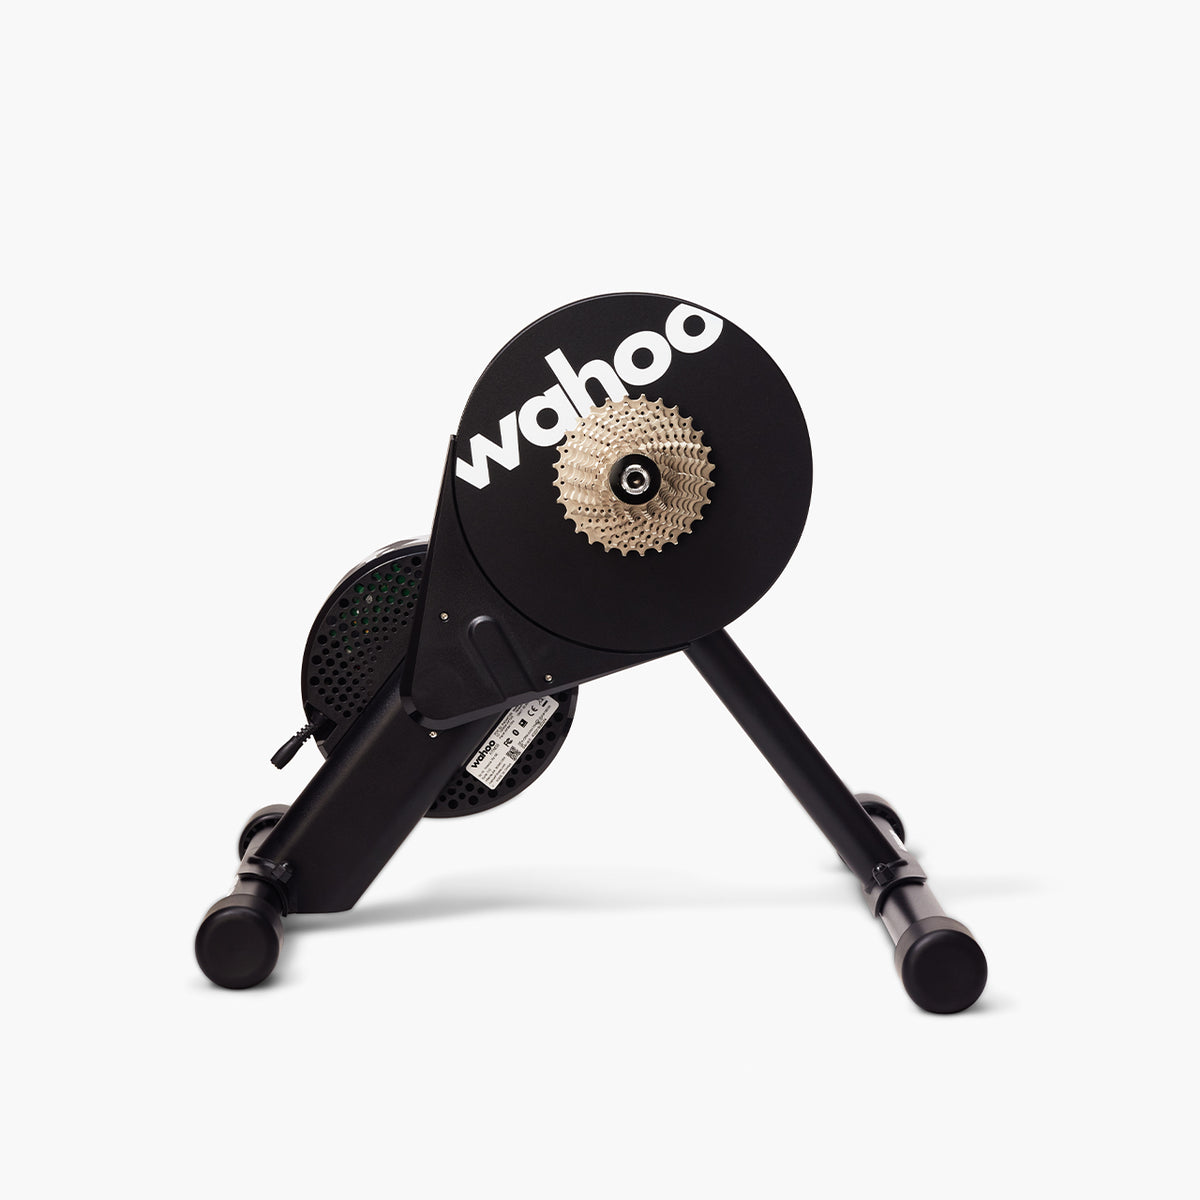 Wahoo KICKR CORE smart trainer with 11-speed cassette